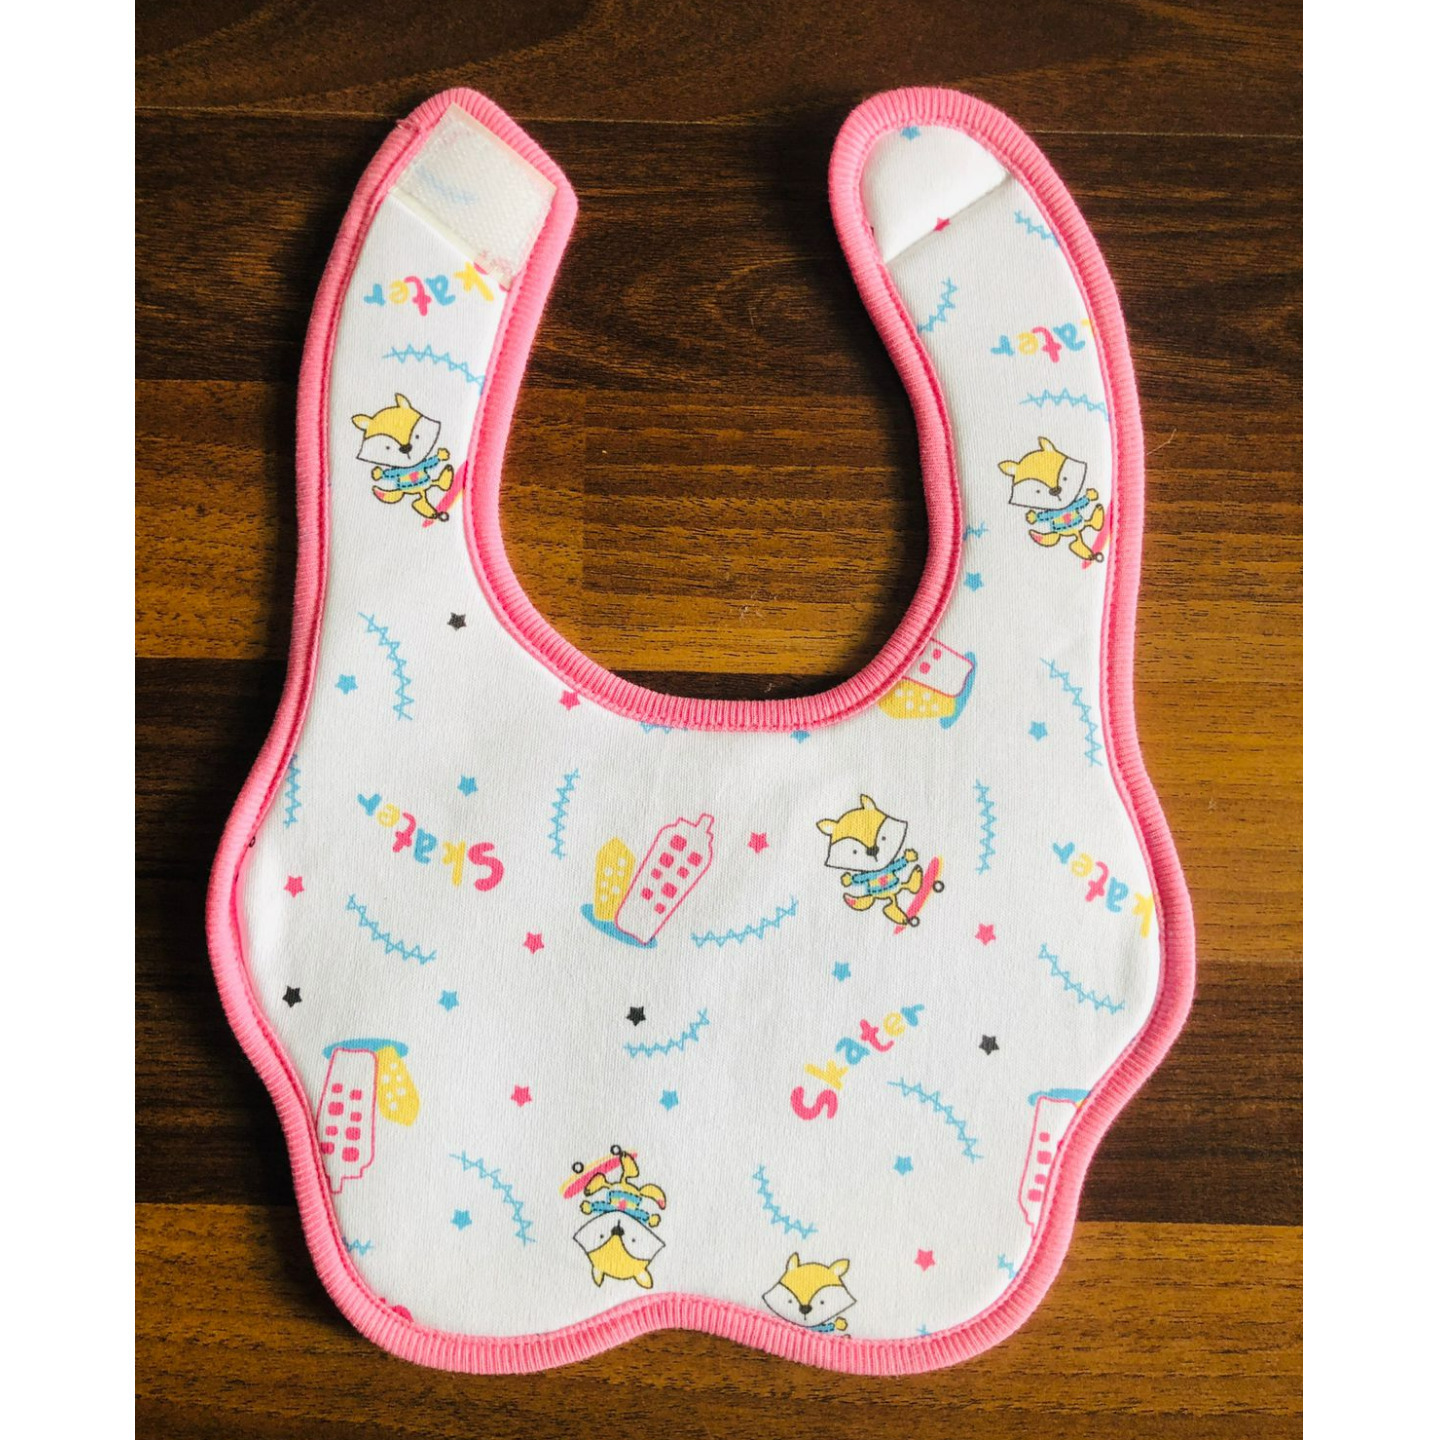 Cradle Togs Newborn Infant Baby Bib Rs 140 Only